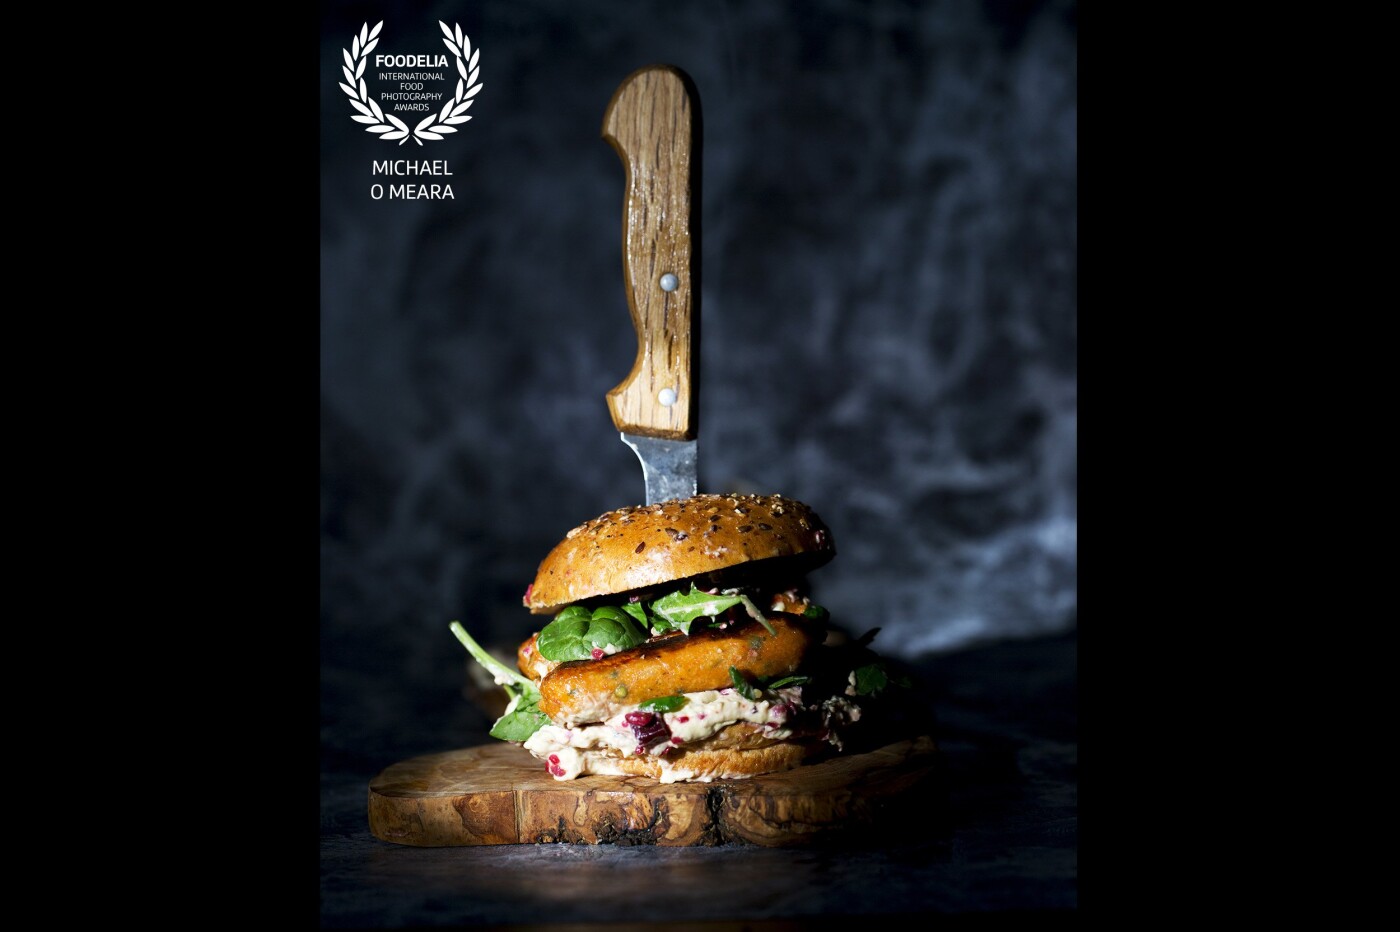 A vegan sausage sandwich with hummus in a multi-seed bun. I wanted to give a gritty, rustic and more masculine feel to this vegetarian sandwich using hard focused light on a smoky background. The sausage ingredients were from a popular value supermarket Aldi. 